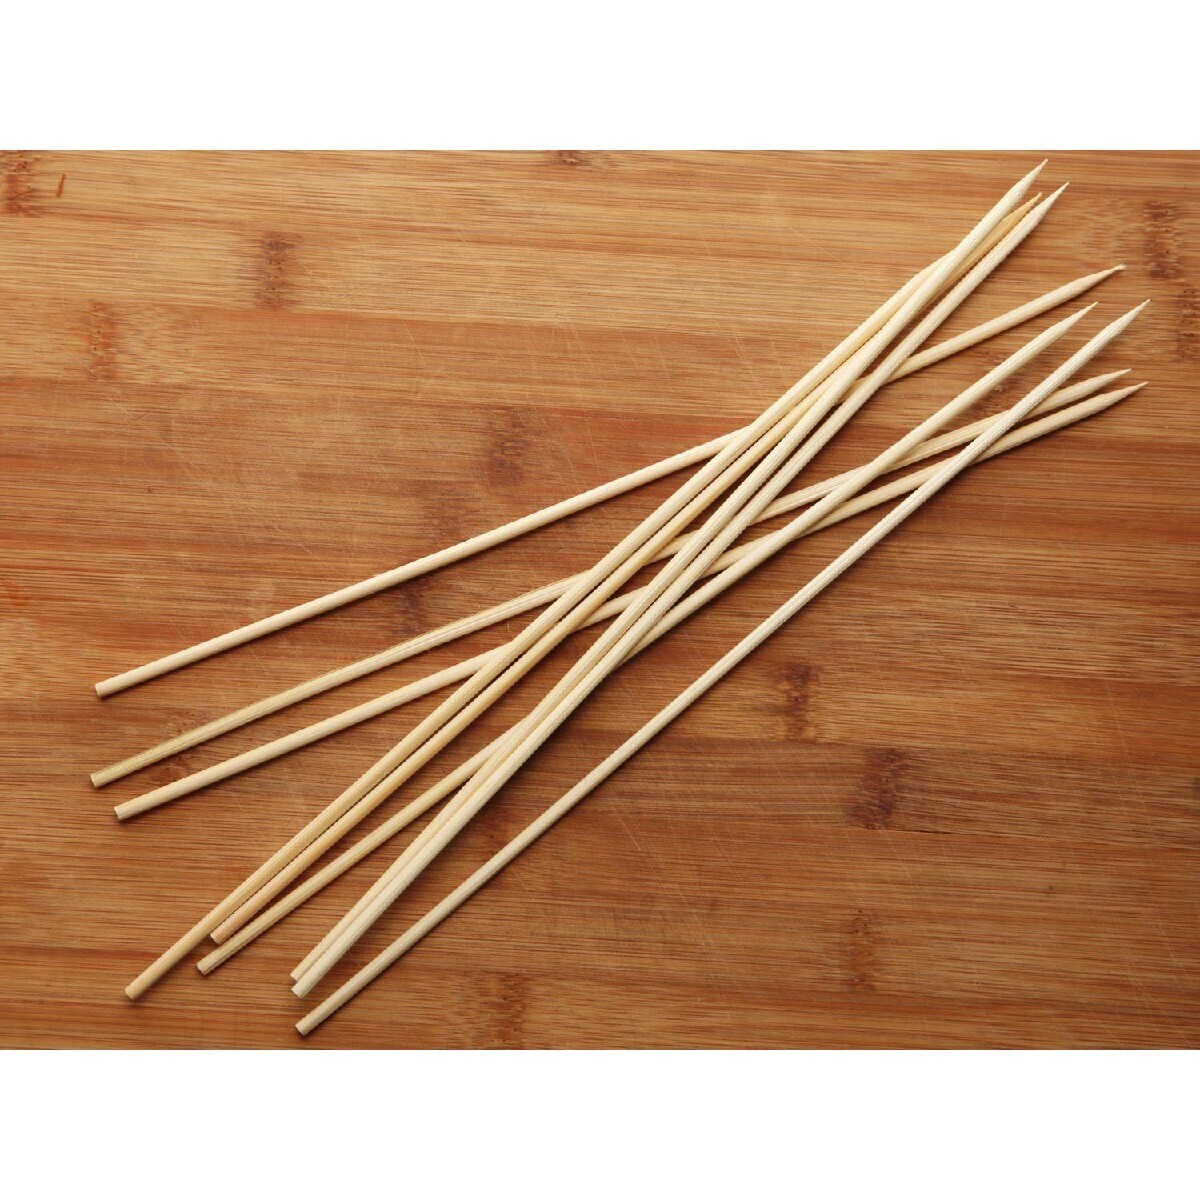 Lulu Bamboo Skewer Square 4mmx25cm 50s